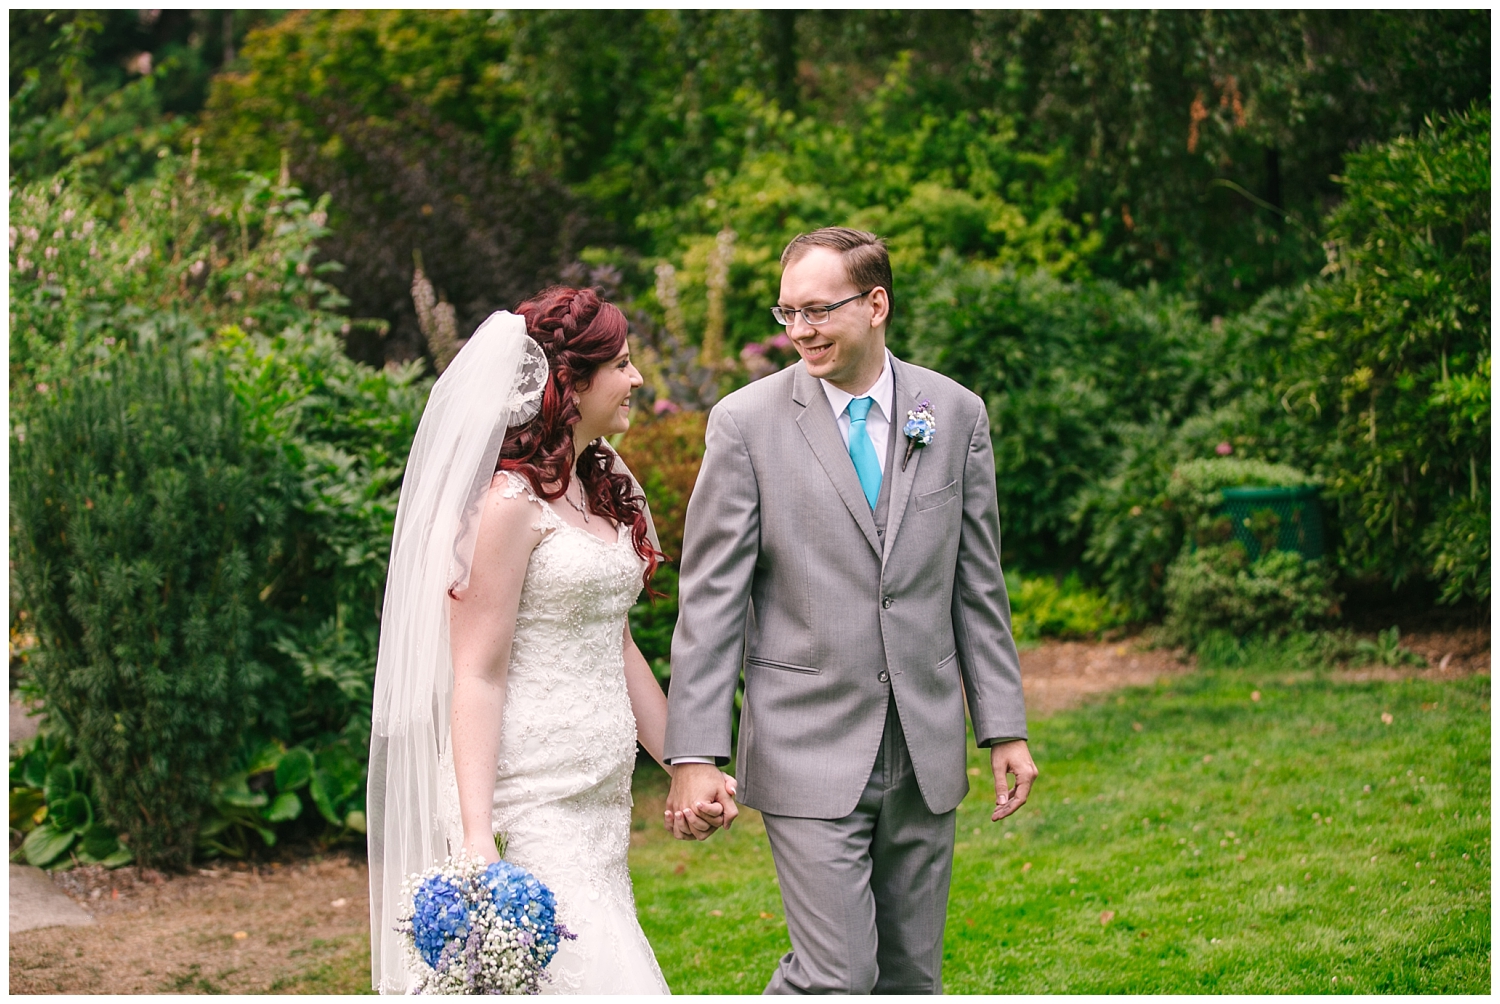 Bride and Groom Portraits at Point Defiance Park Rose Garden in Tacoma, WA